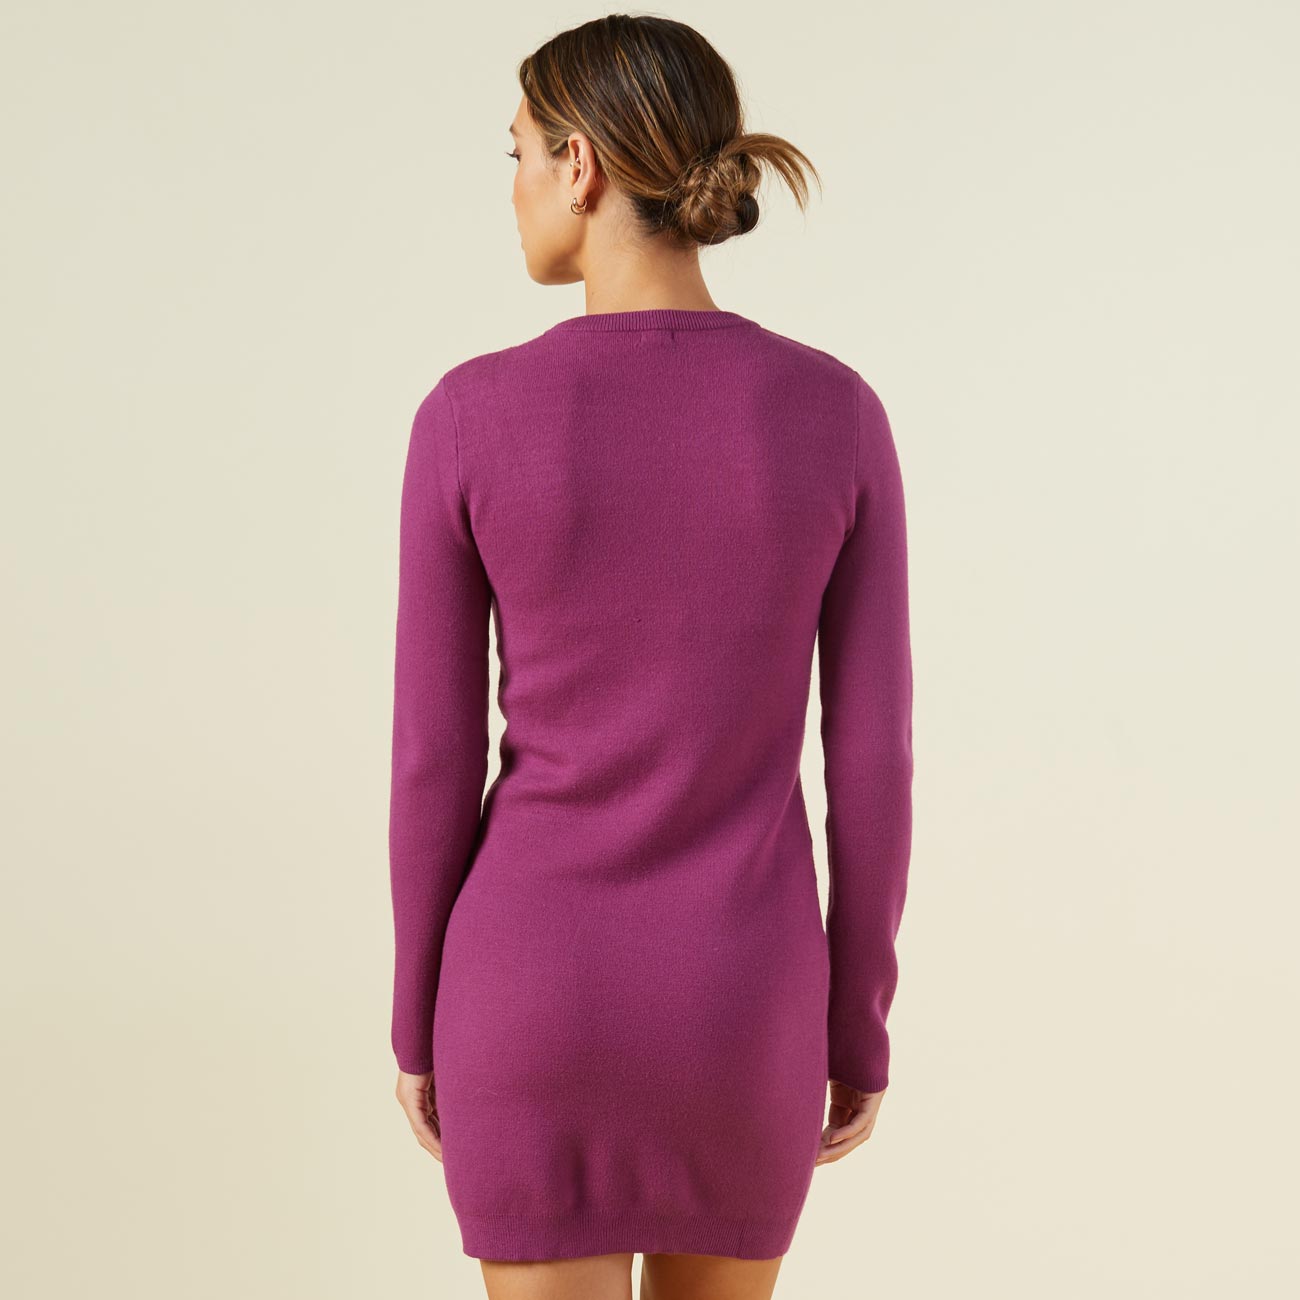 Back view of model wearing the supersoft sweater knit cut out dress in raspberry rose.